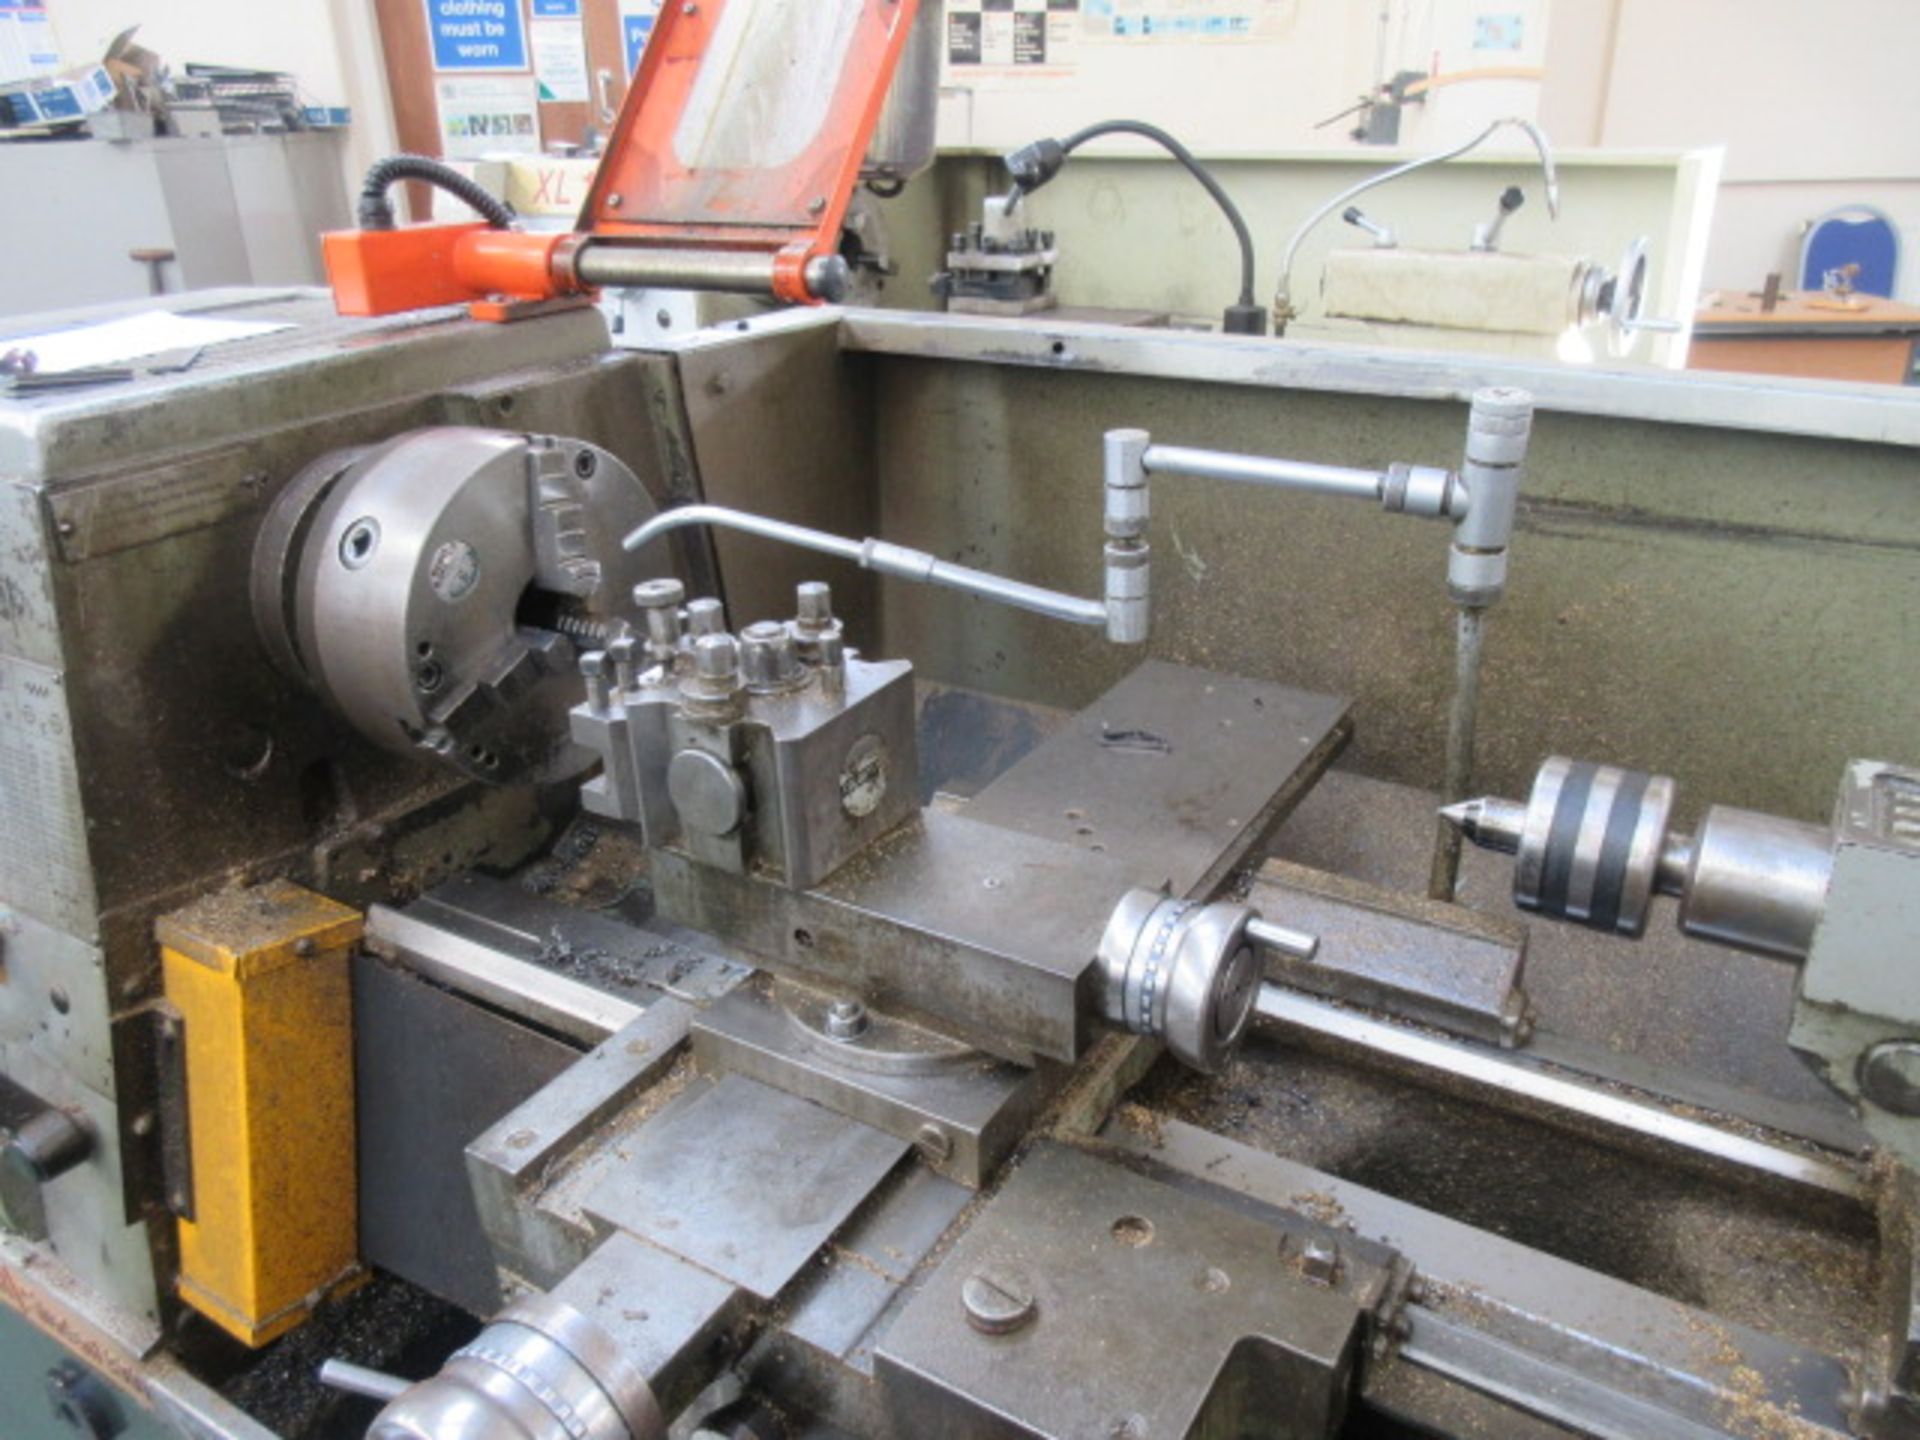 Colchester Student 1800 13" dia x 24" gap bed lathe with 3 jaw chuck, tailstock, metric/Imperial - Image 2 of 3